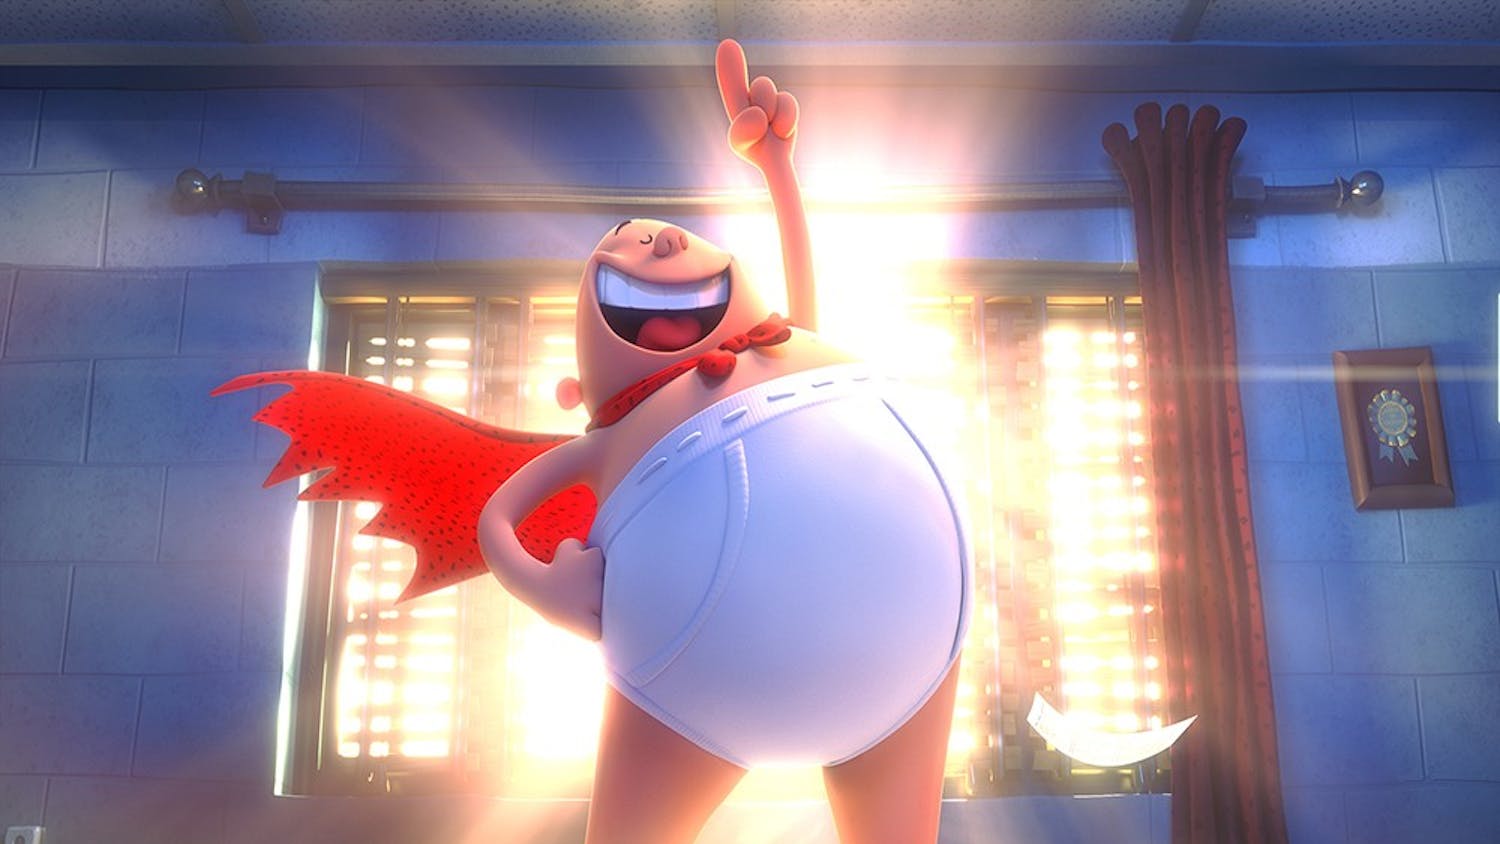 Ed Helms stars as Captain Underpants in the movie adaptation of the popular book franchise (Courtesy photo).